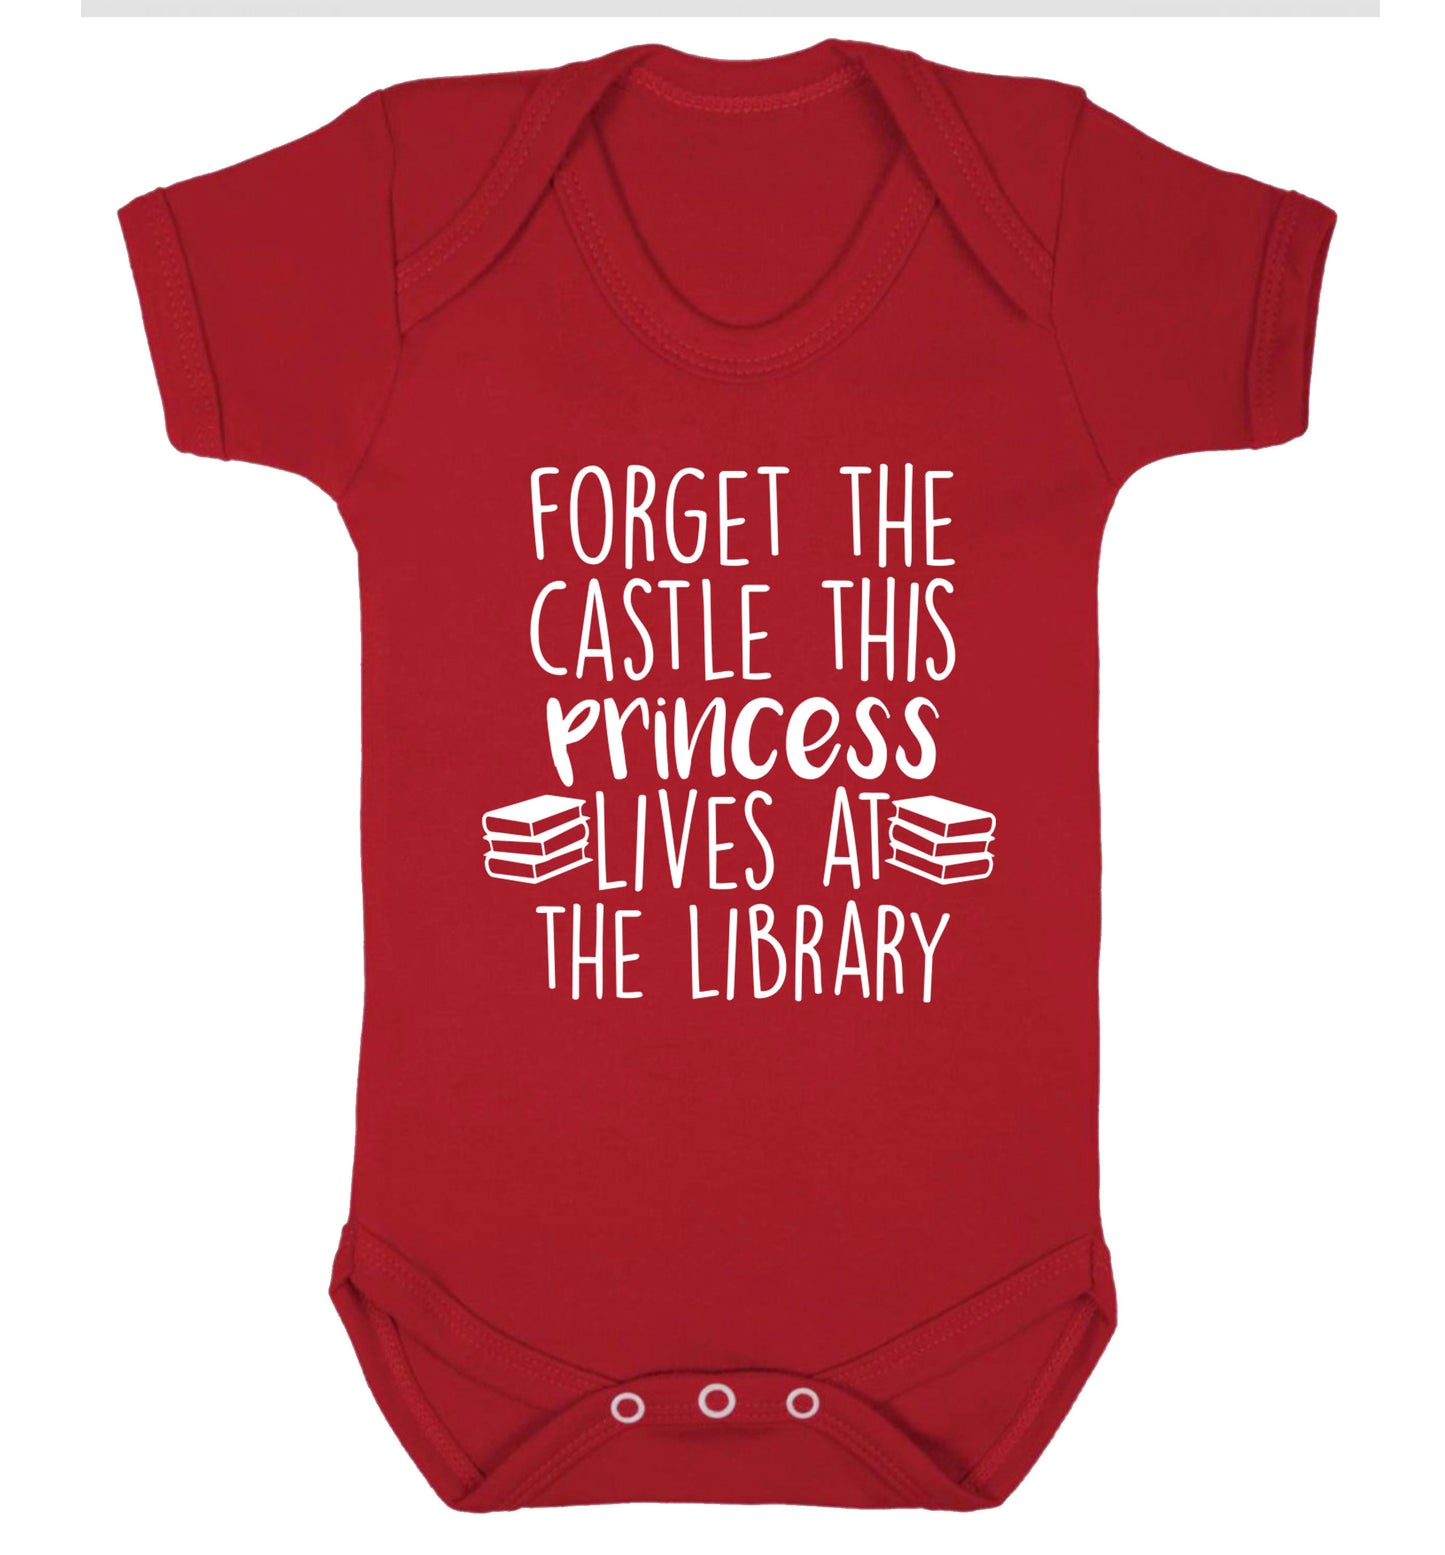 Forget the castle this princess lives at the library Baby Vest red 18-24 months